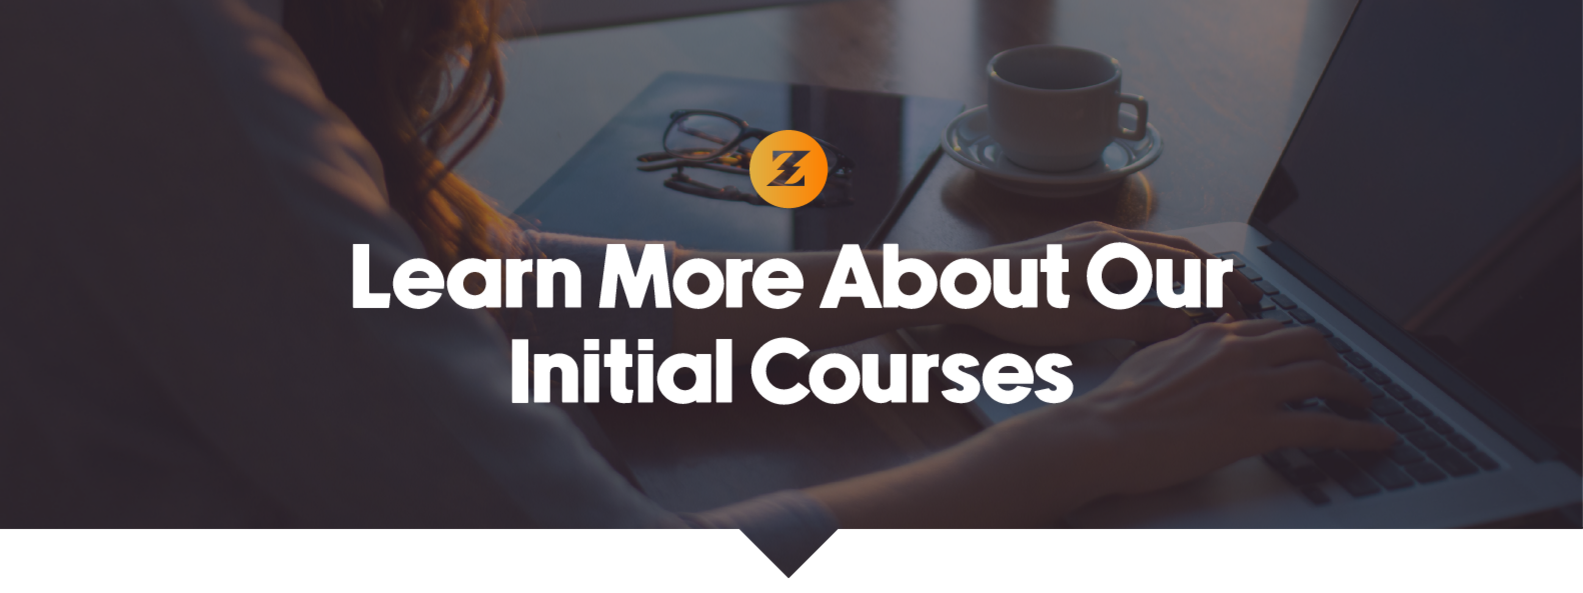 Zeus icon above text that reads "Learn More About Our Initial Course" on a dark background 